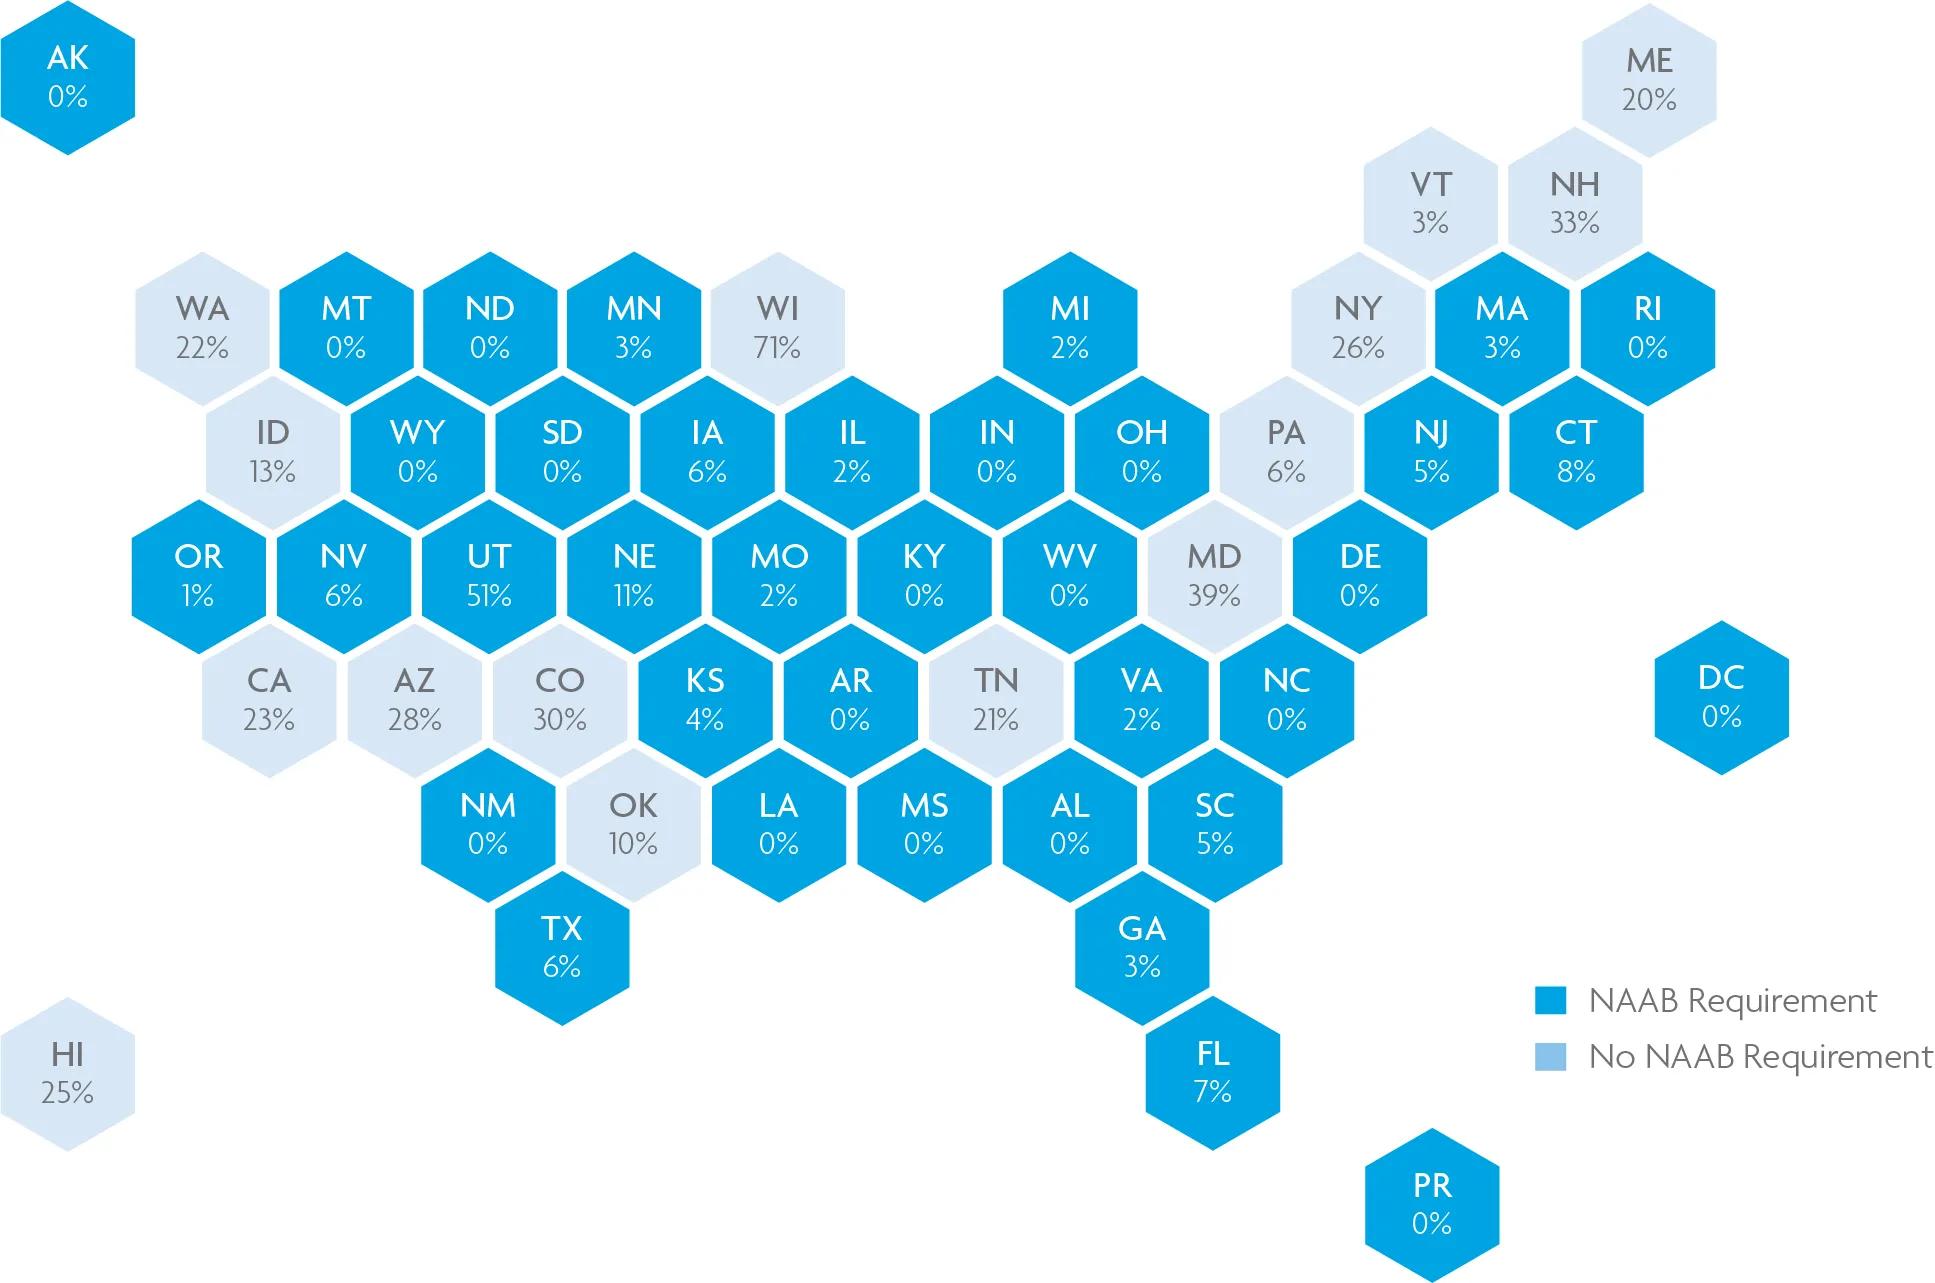 In states that allow additional pathways, candidates are more likely to pursue licensure without a degree from a NAAB-accredited program. For help with data accessibility, contact communications@ncarb.org. 